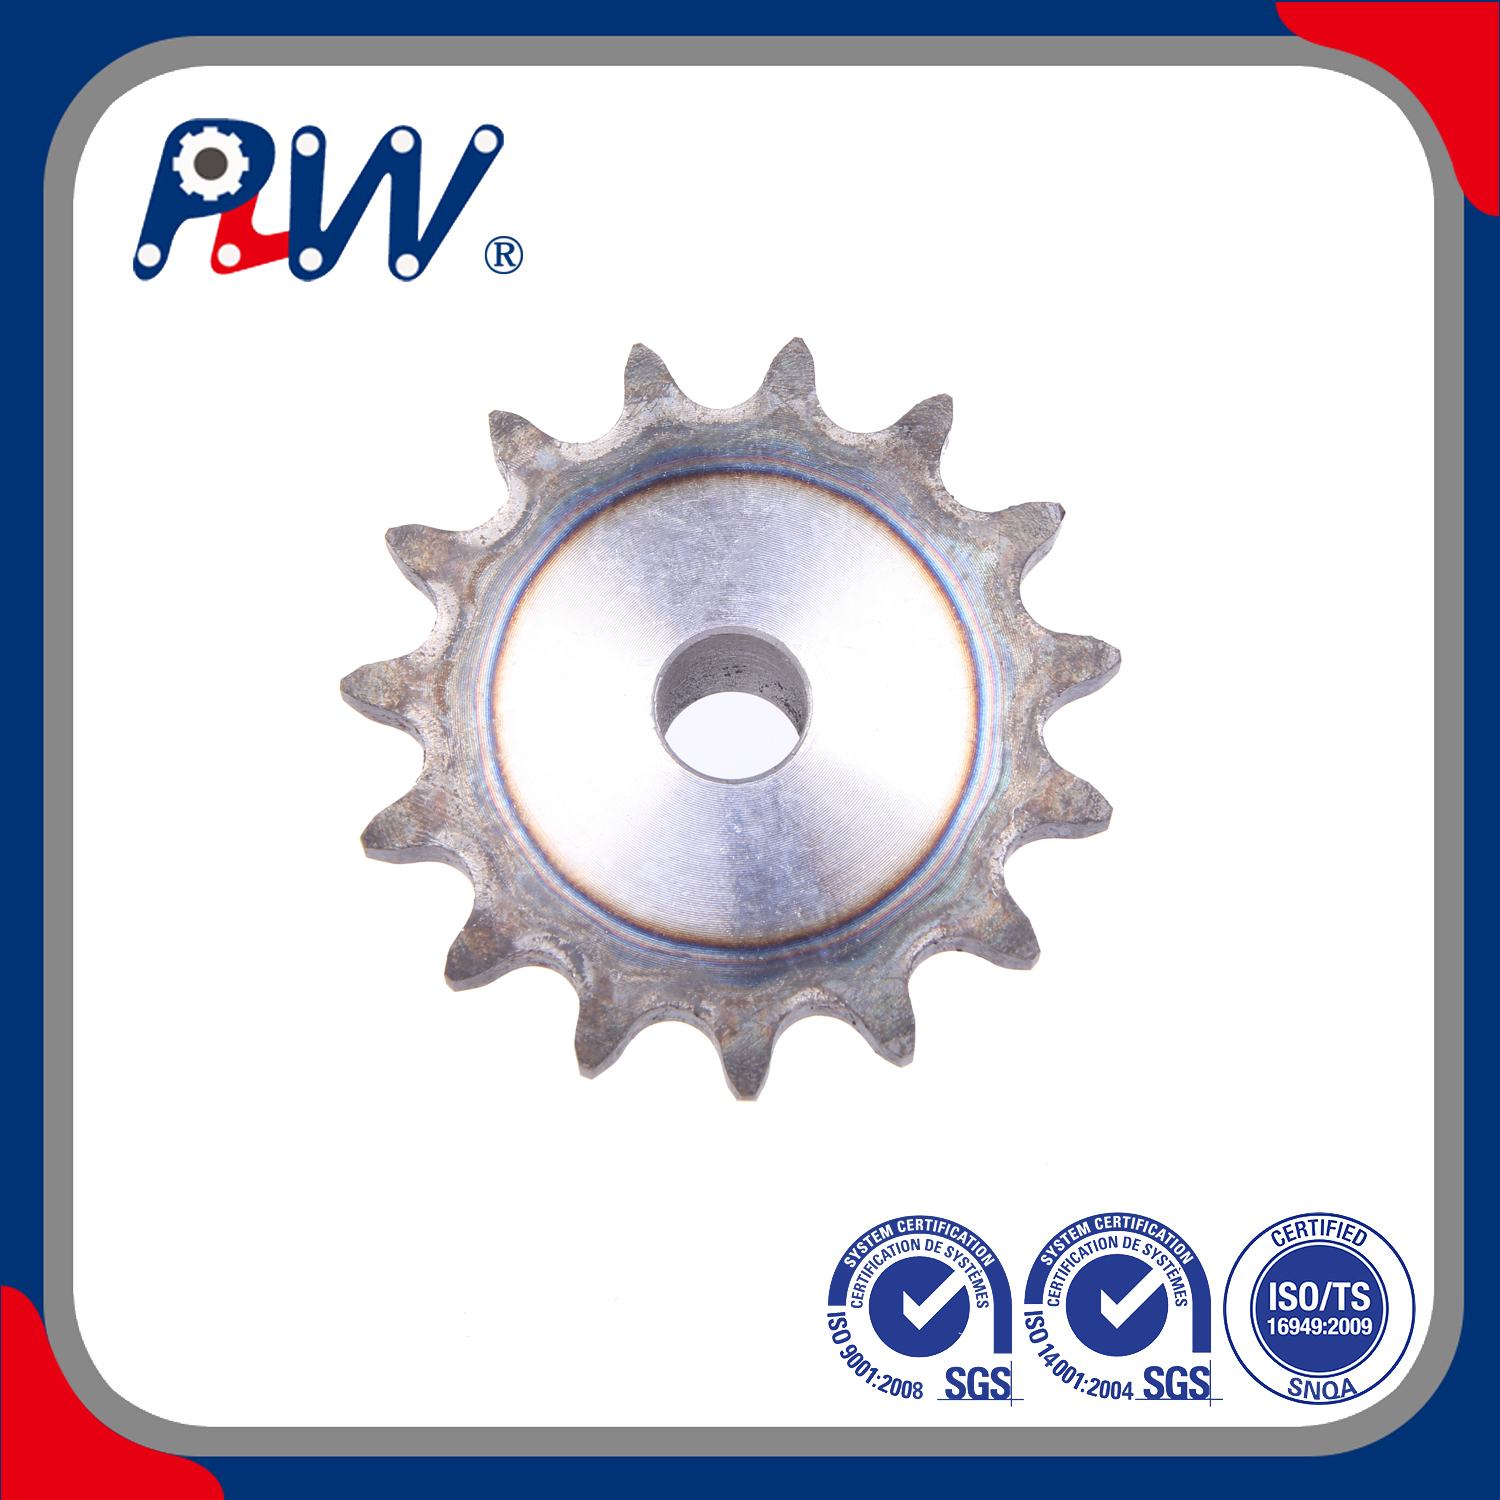 ISO Standard Made to Order & Tooth Surface Hardening Sprockets for Roller Chain